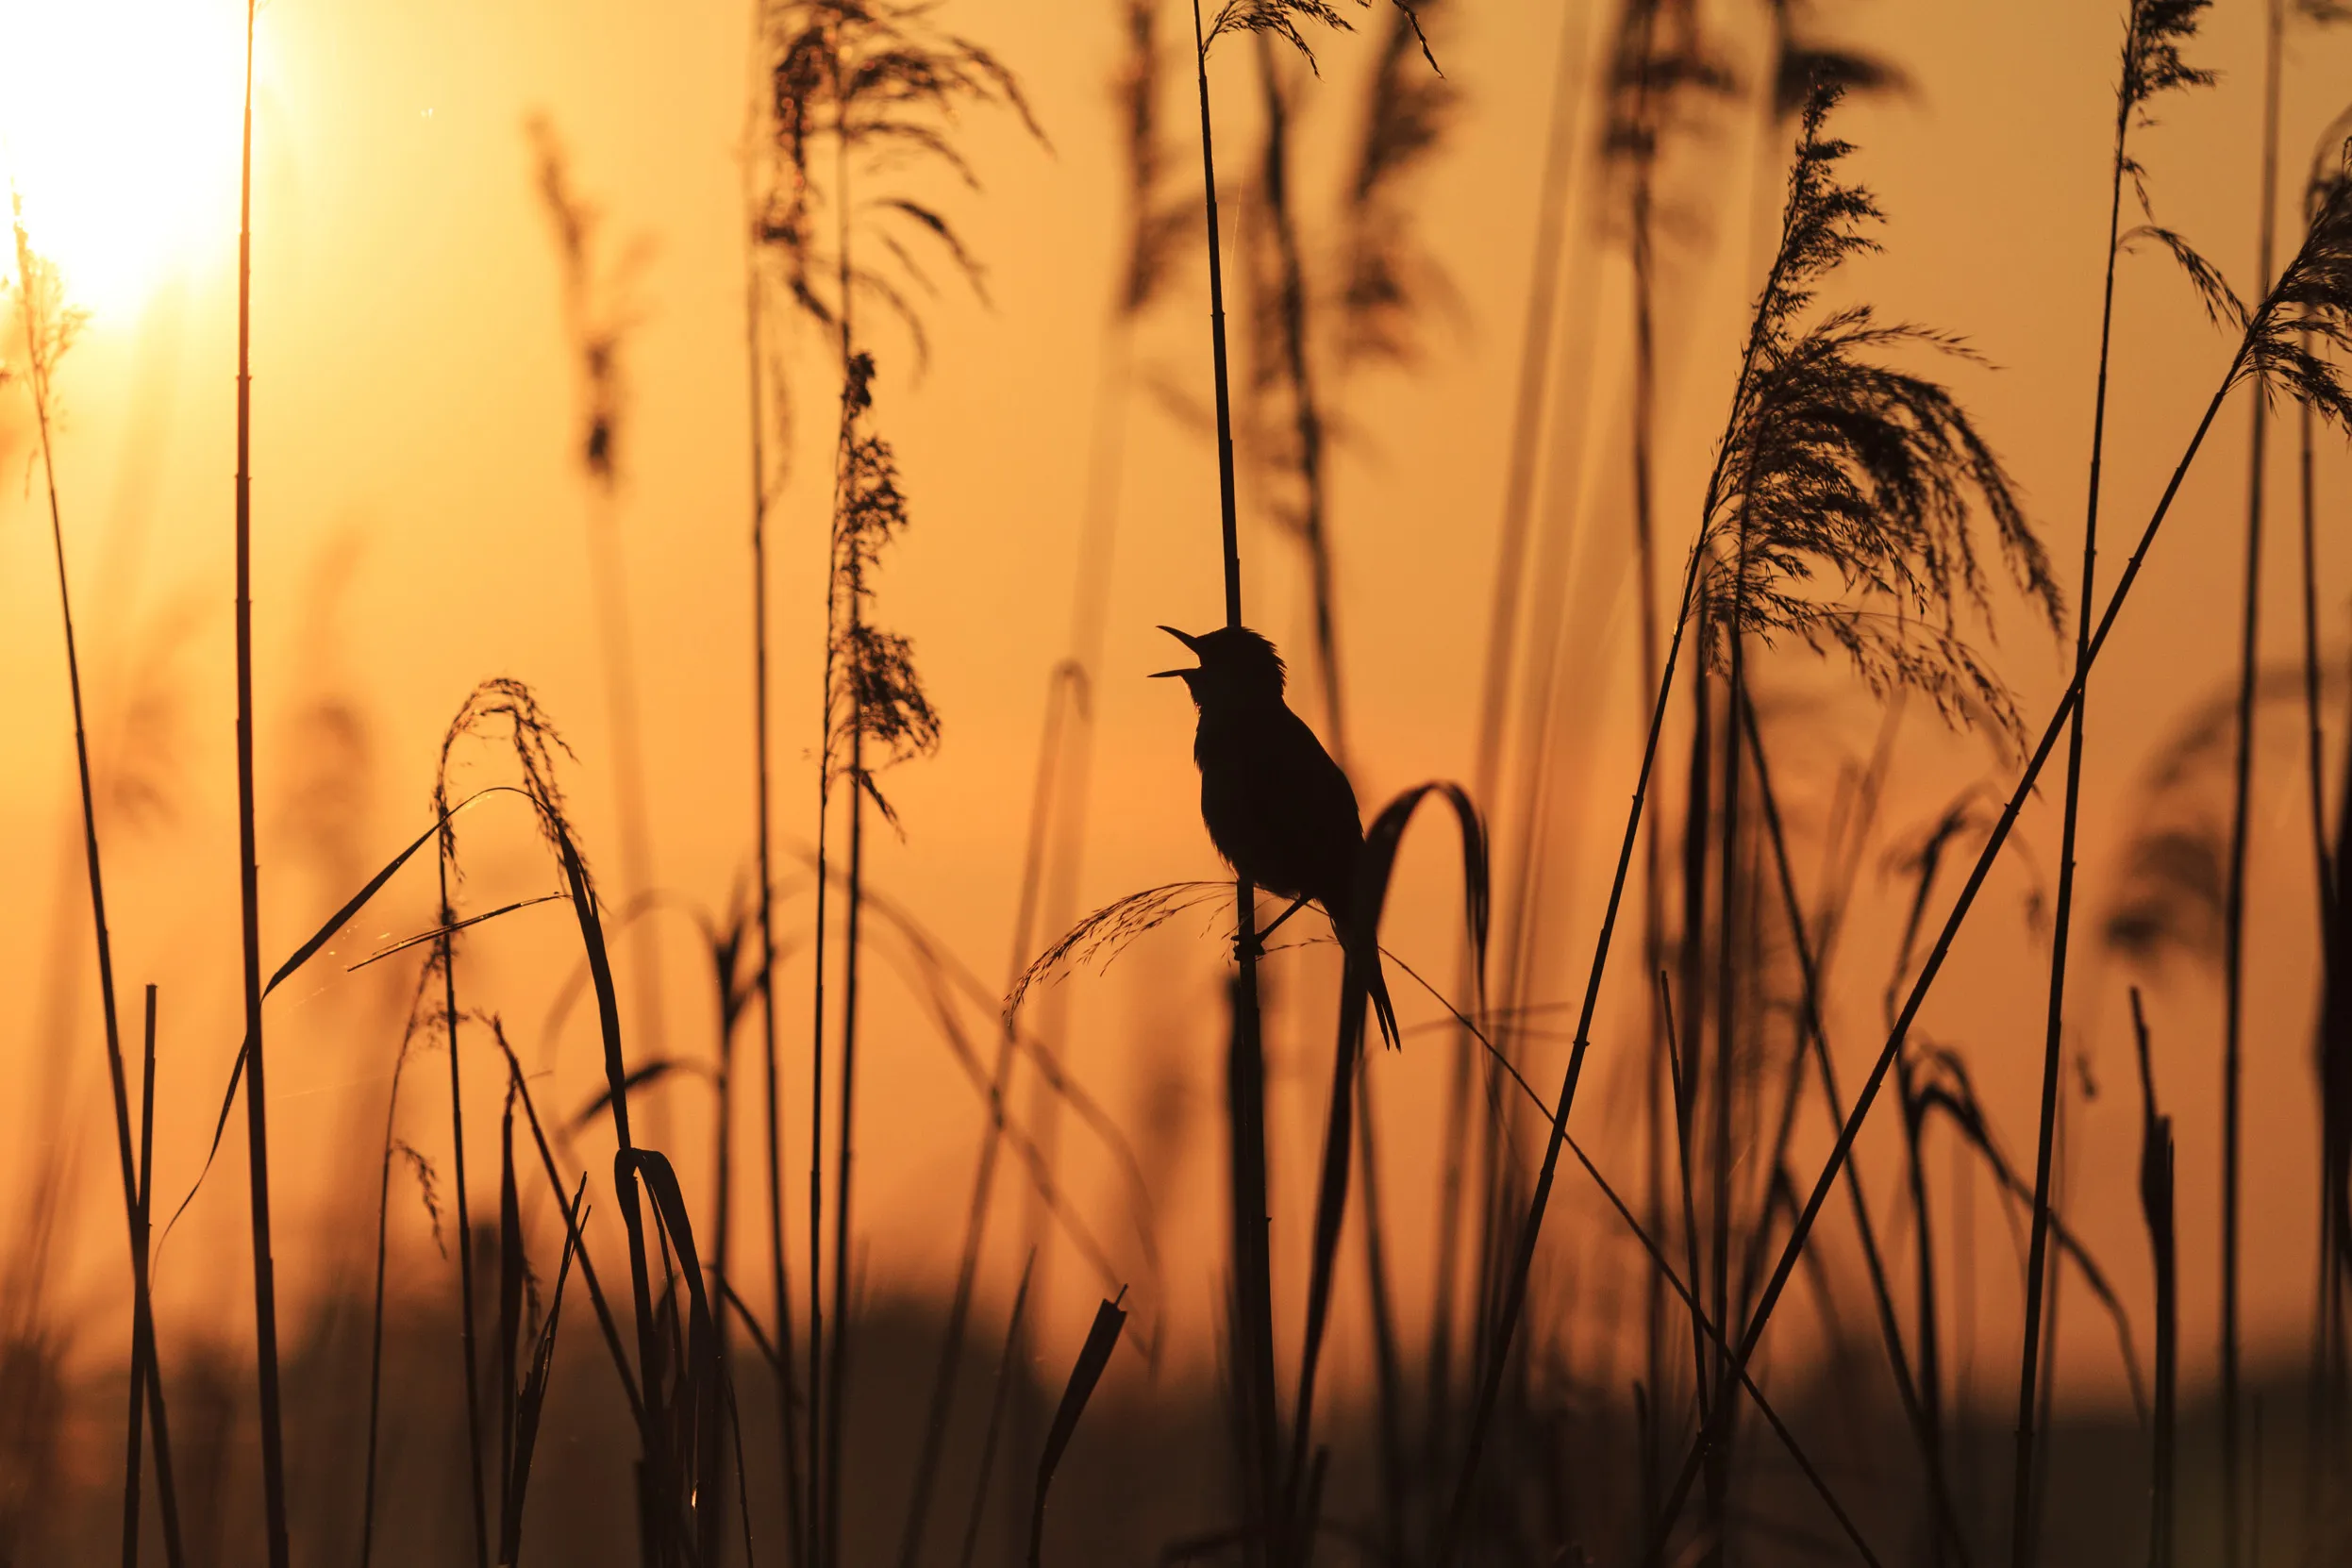 A warbler perched on reeds with 